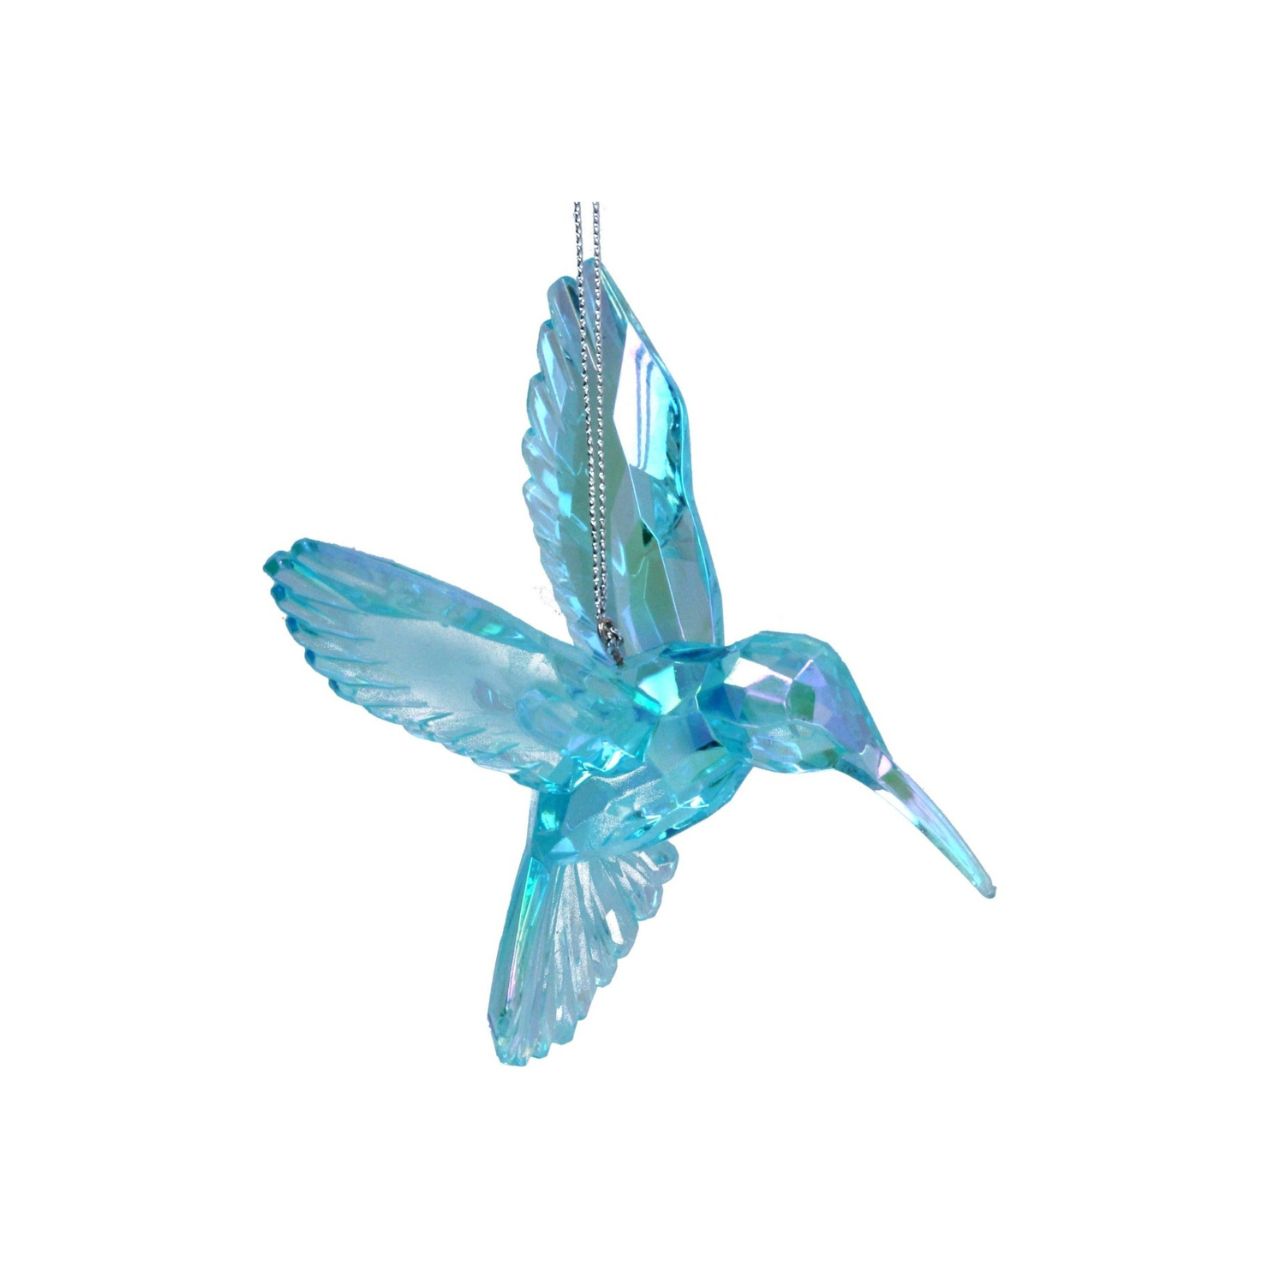 Gisela Graham Turquoise Acrylic Hummingbird Christmas Ornament  Browse our beautiful range of luxury Christmas tree decorations, baubles & ornaments for your tree this Christmas.